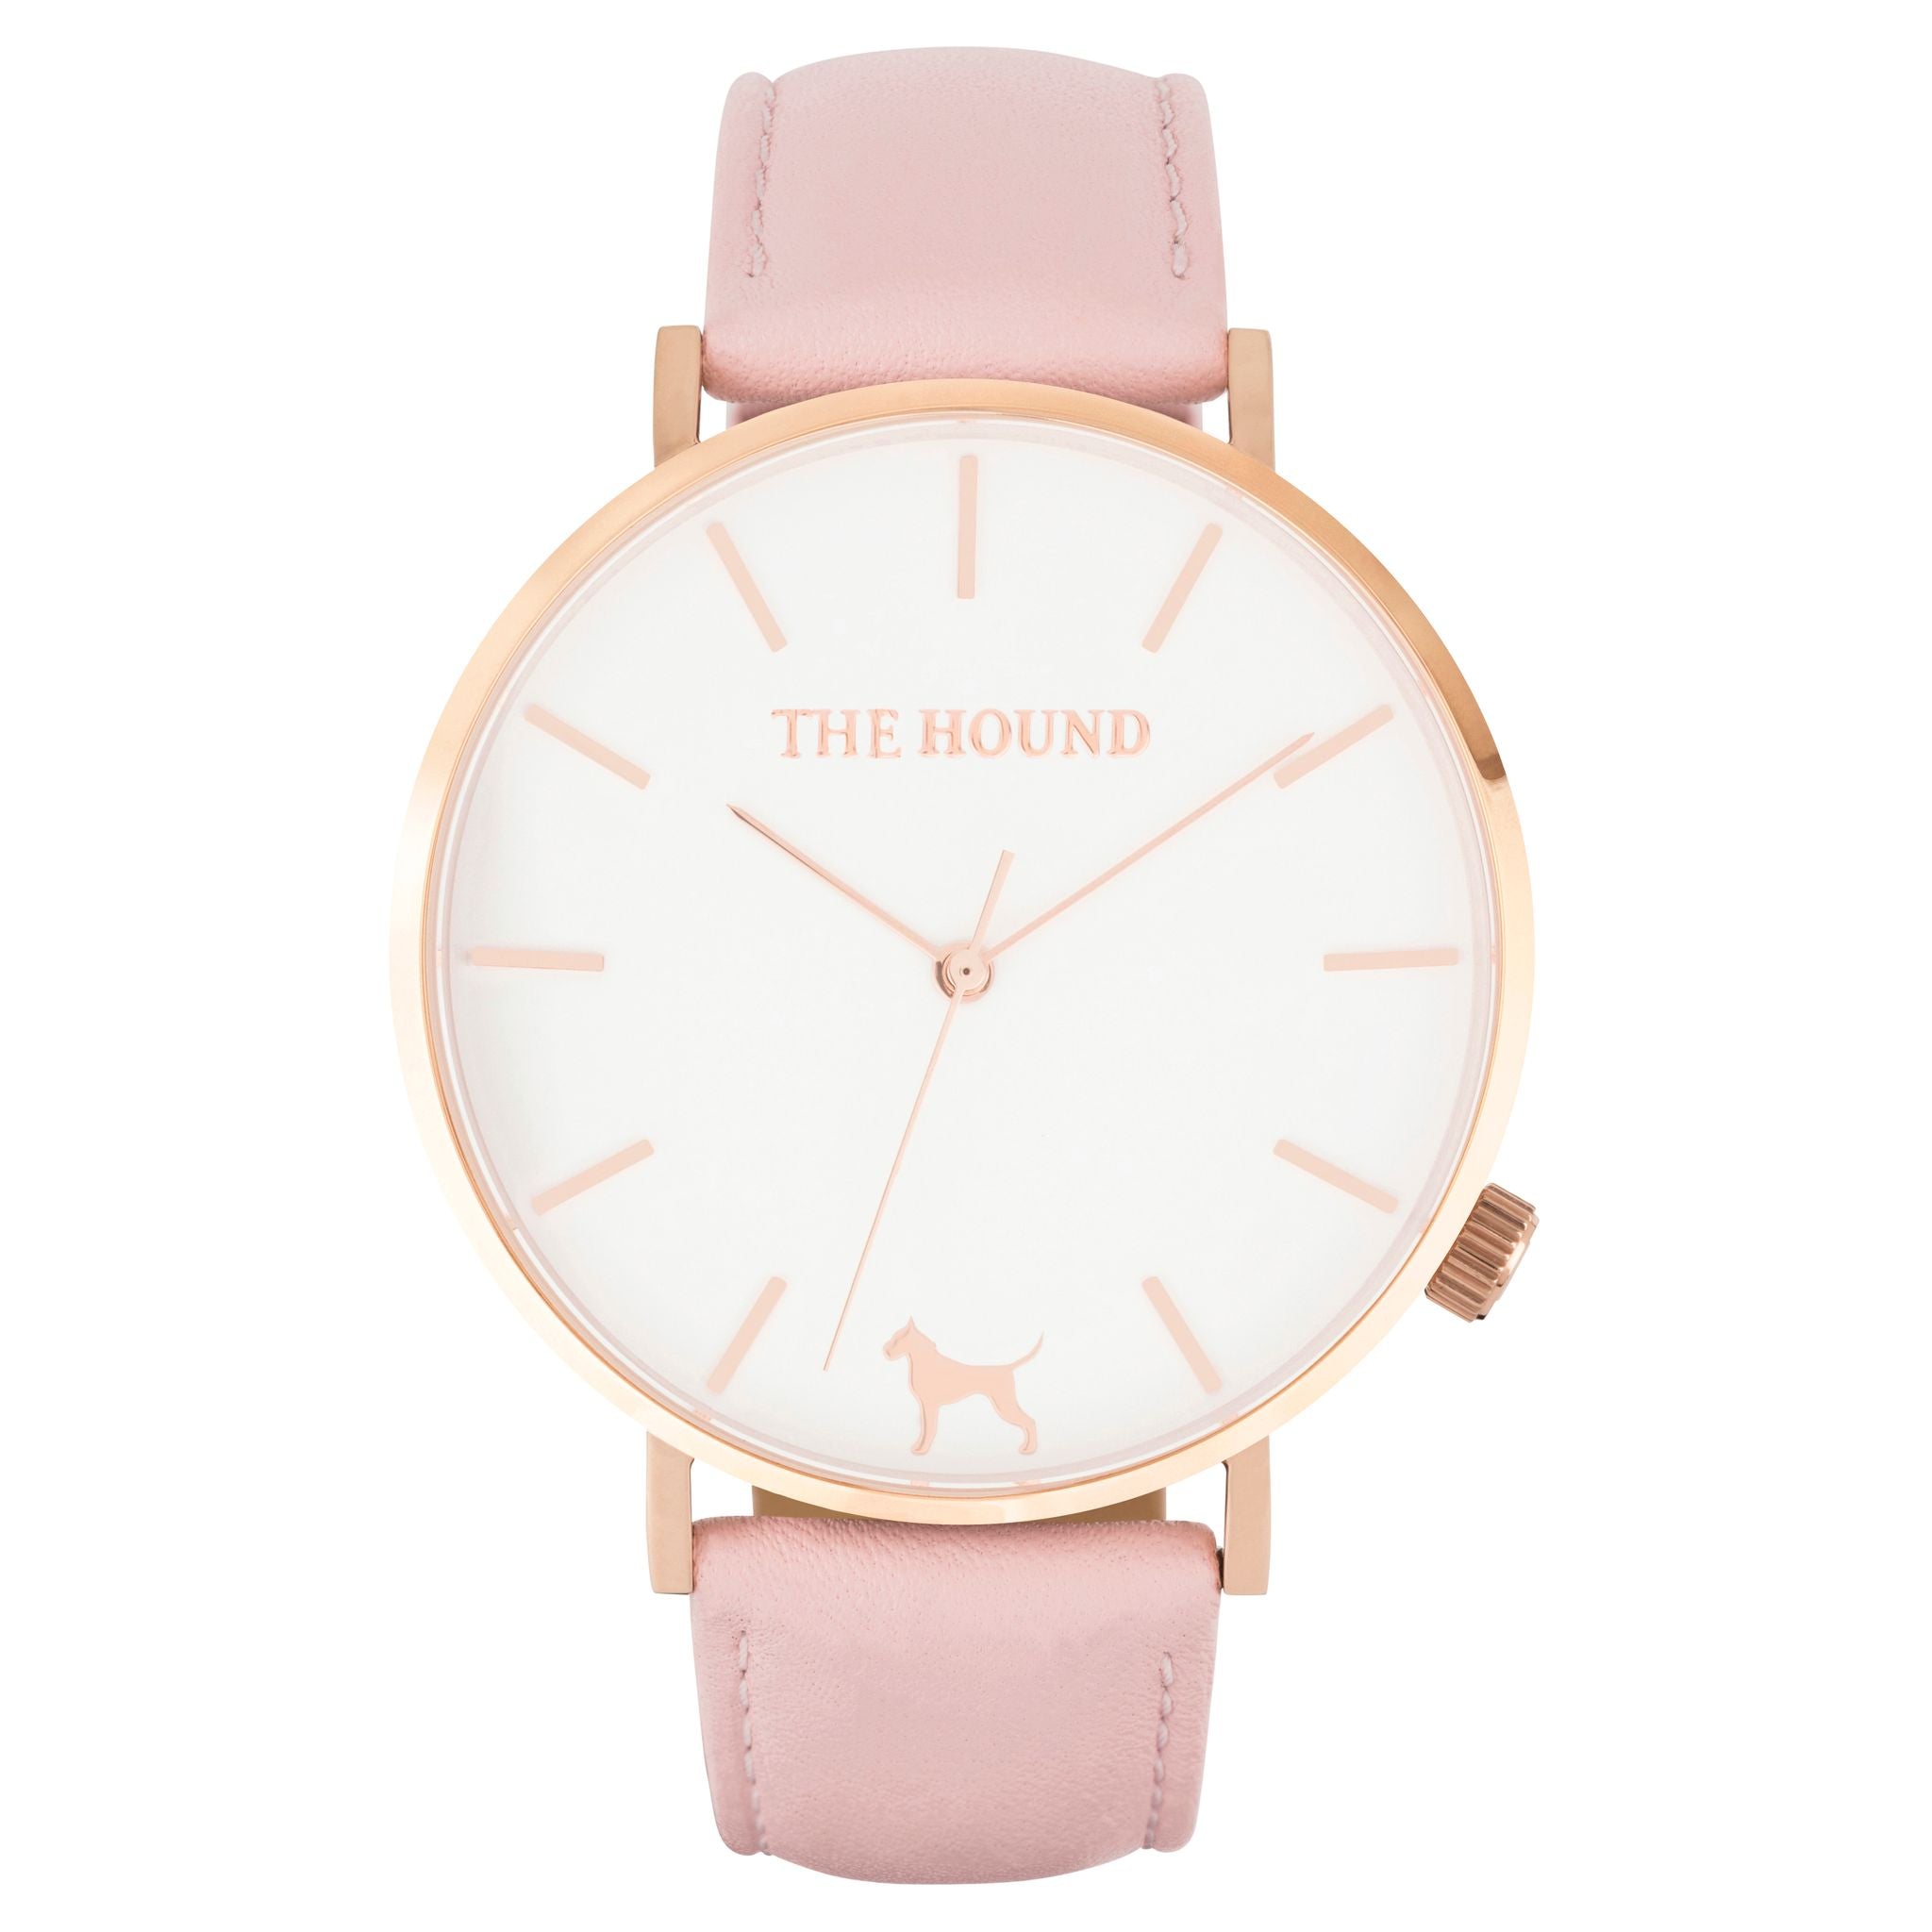 Rose gold & white face watch with blush pink leather